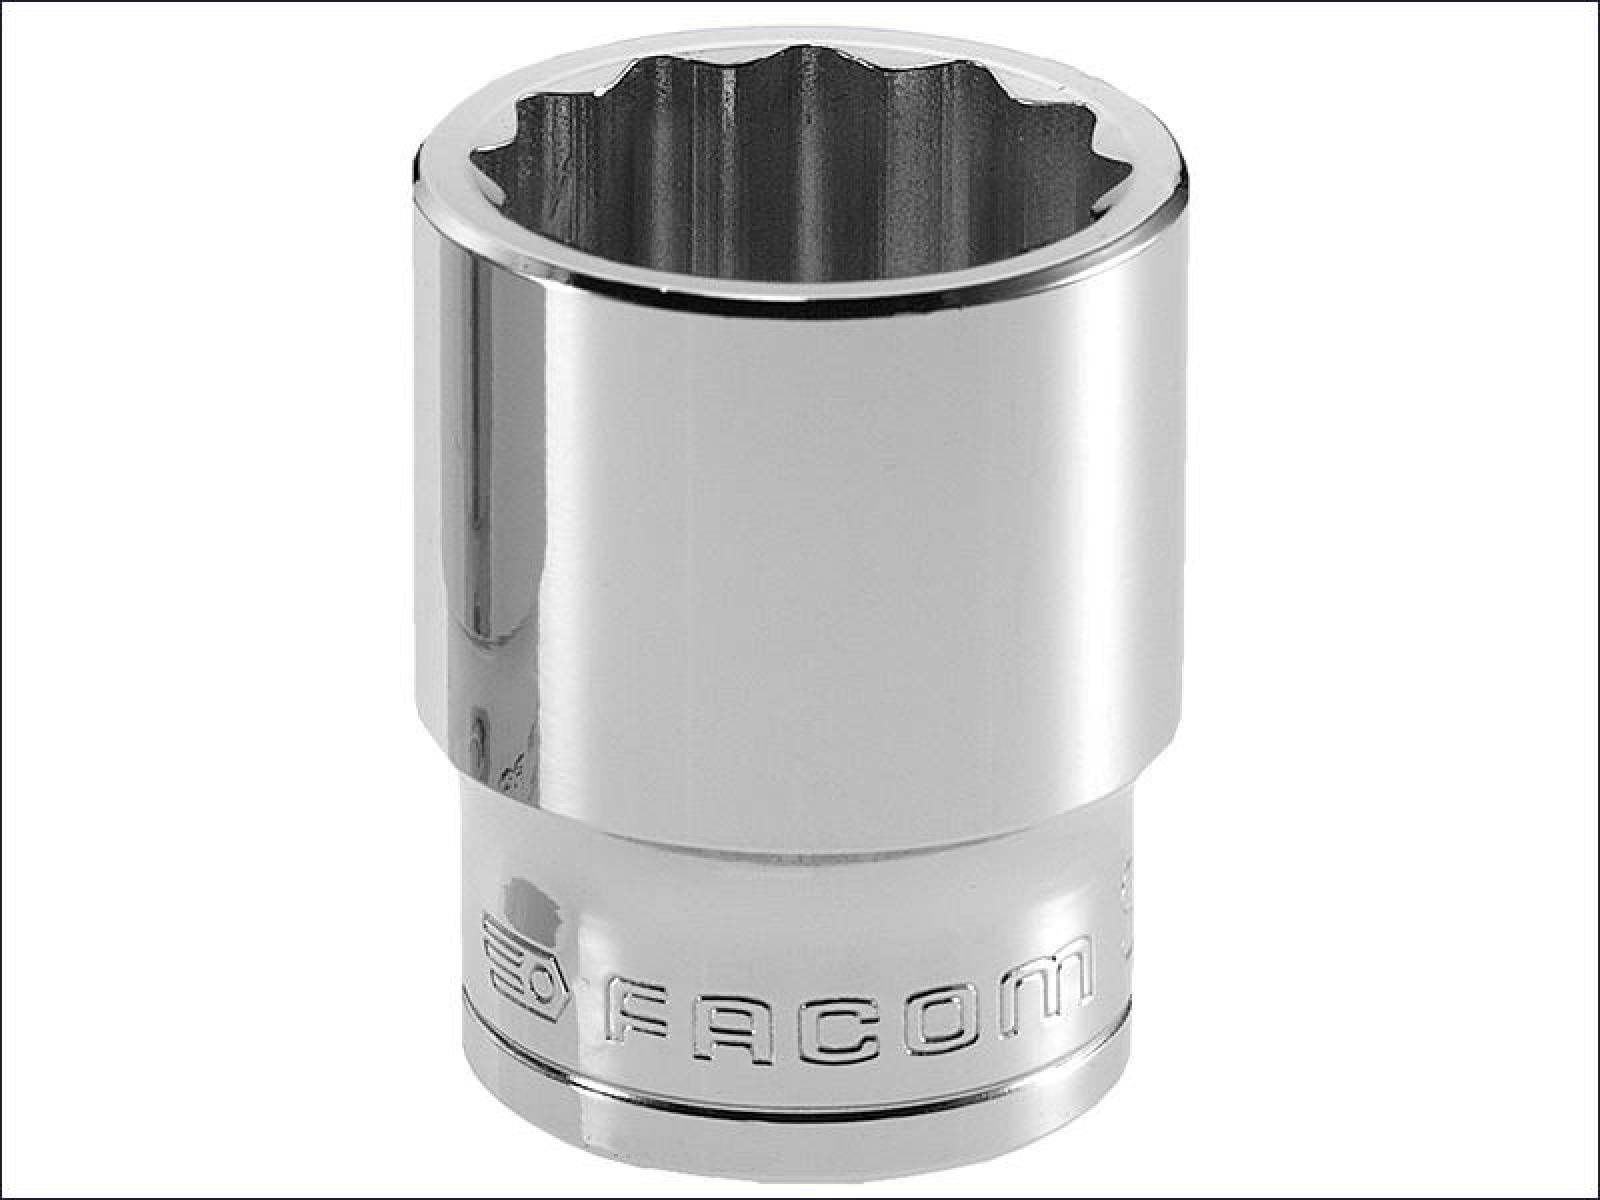 E117068 12 point standard 26mm socket Britool expert by Facom 1/2" drive 